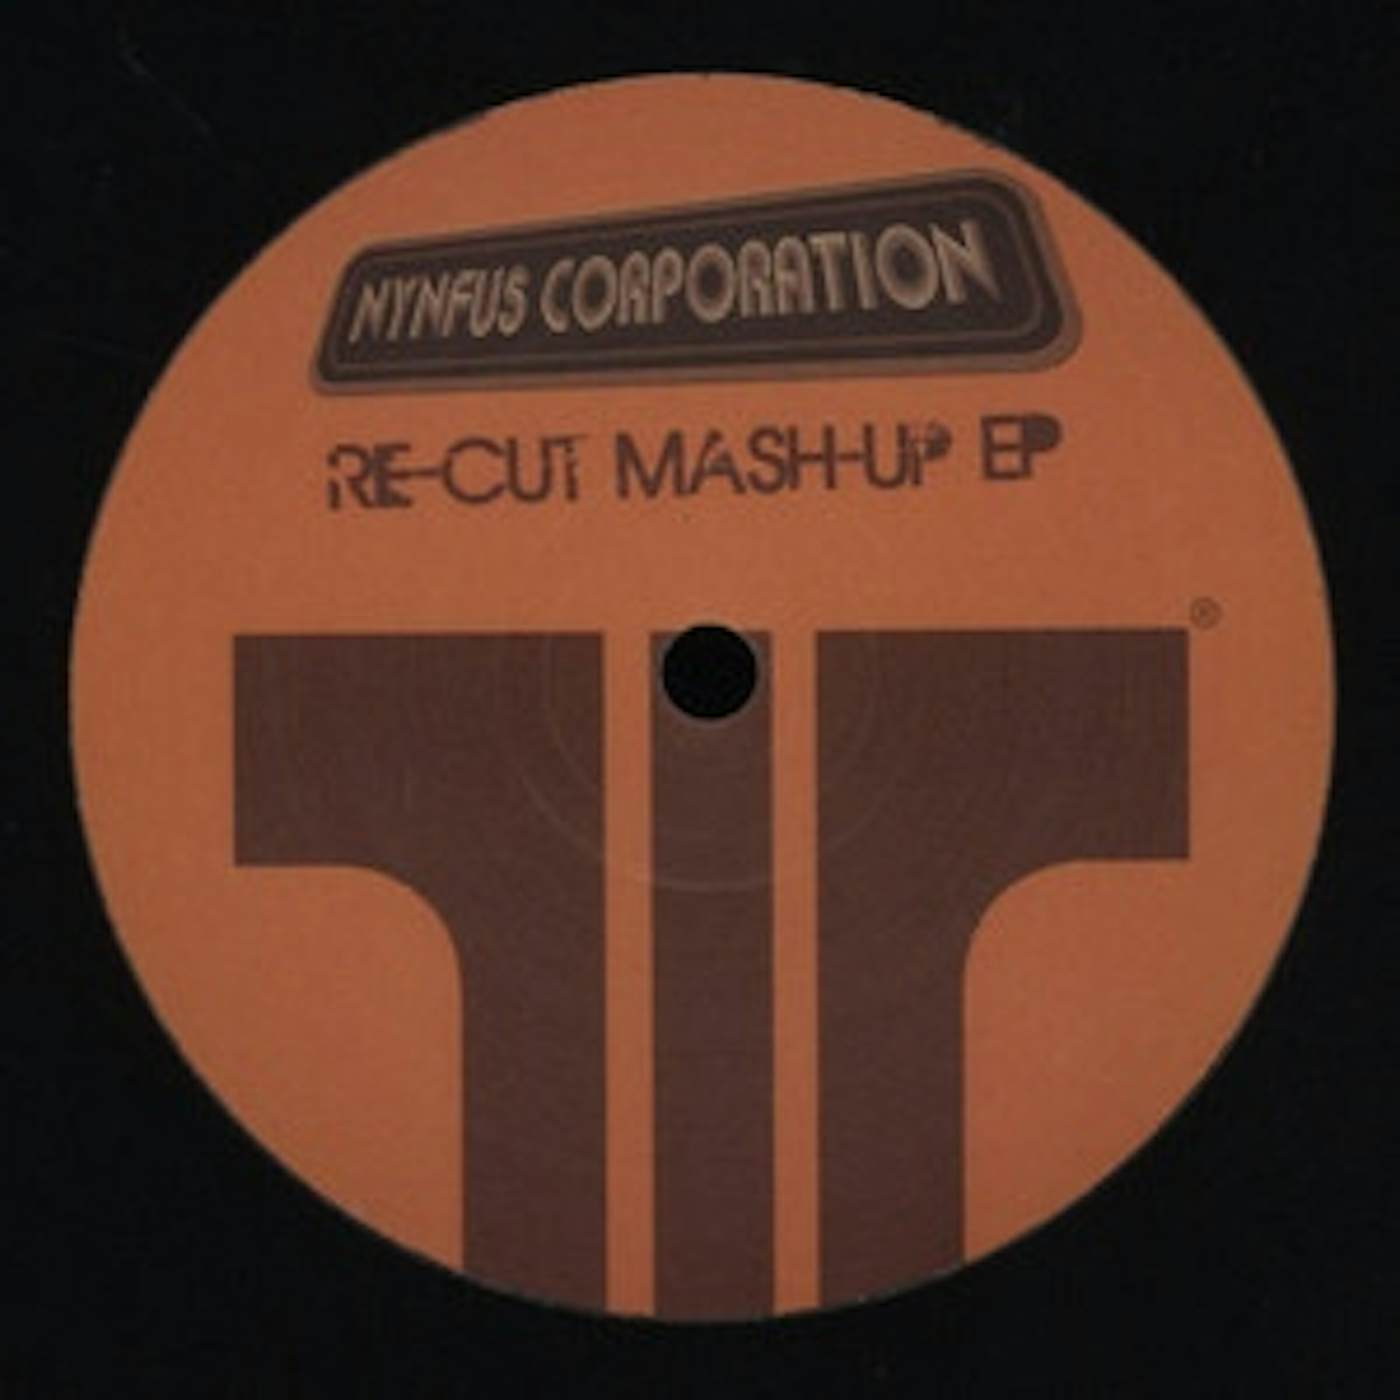 Nynfus Corp RE-CUT MASH-UP EP Vinyl Record